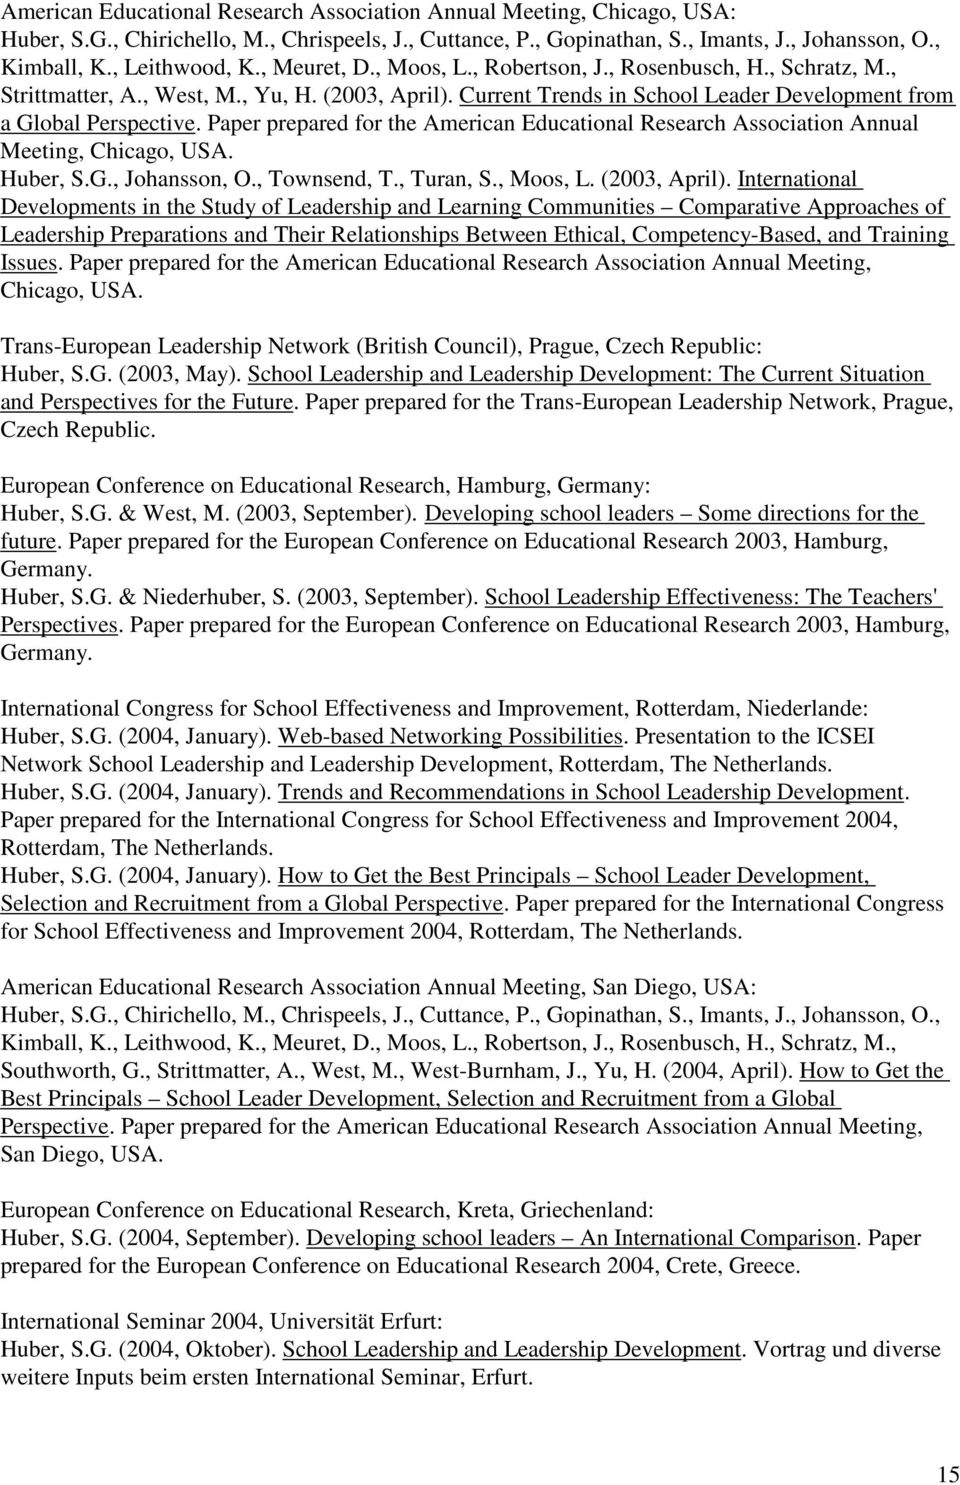 Current Trends in School Leader Development from a Global Perspective. Paper prepared for the American Educational Research Association Annual Meeting, Chicago, USA. Huber, S.G., Johansson, O.